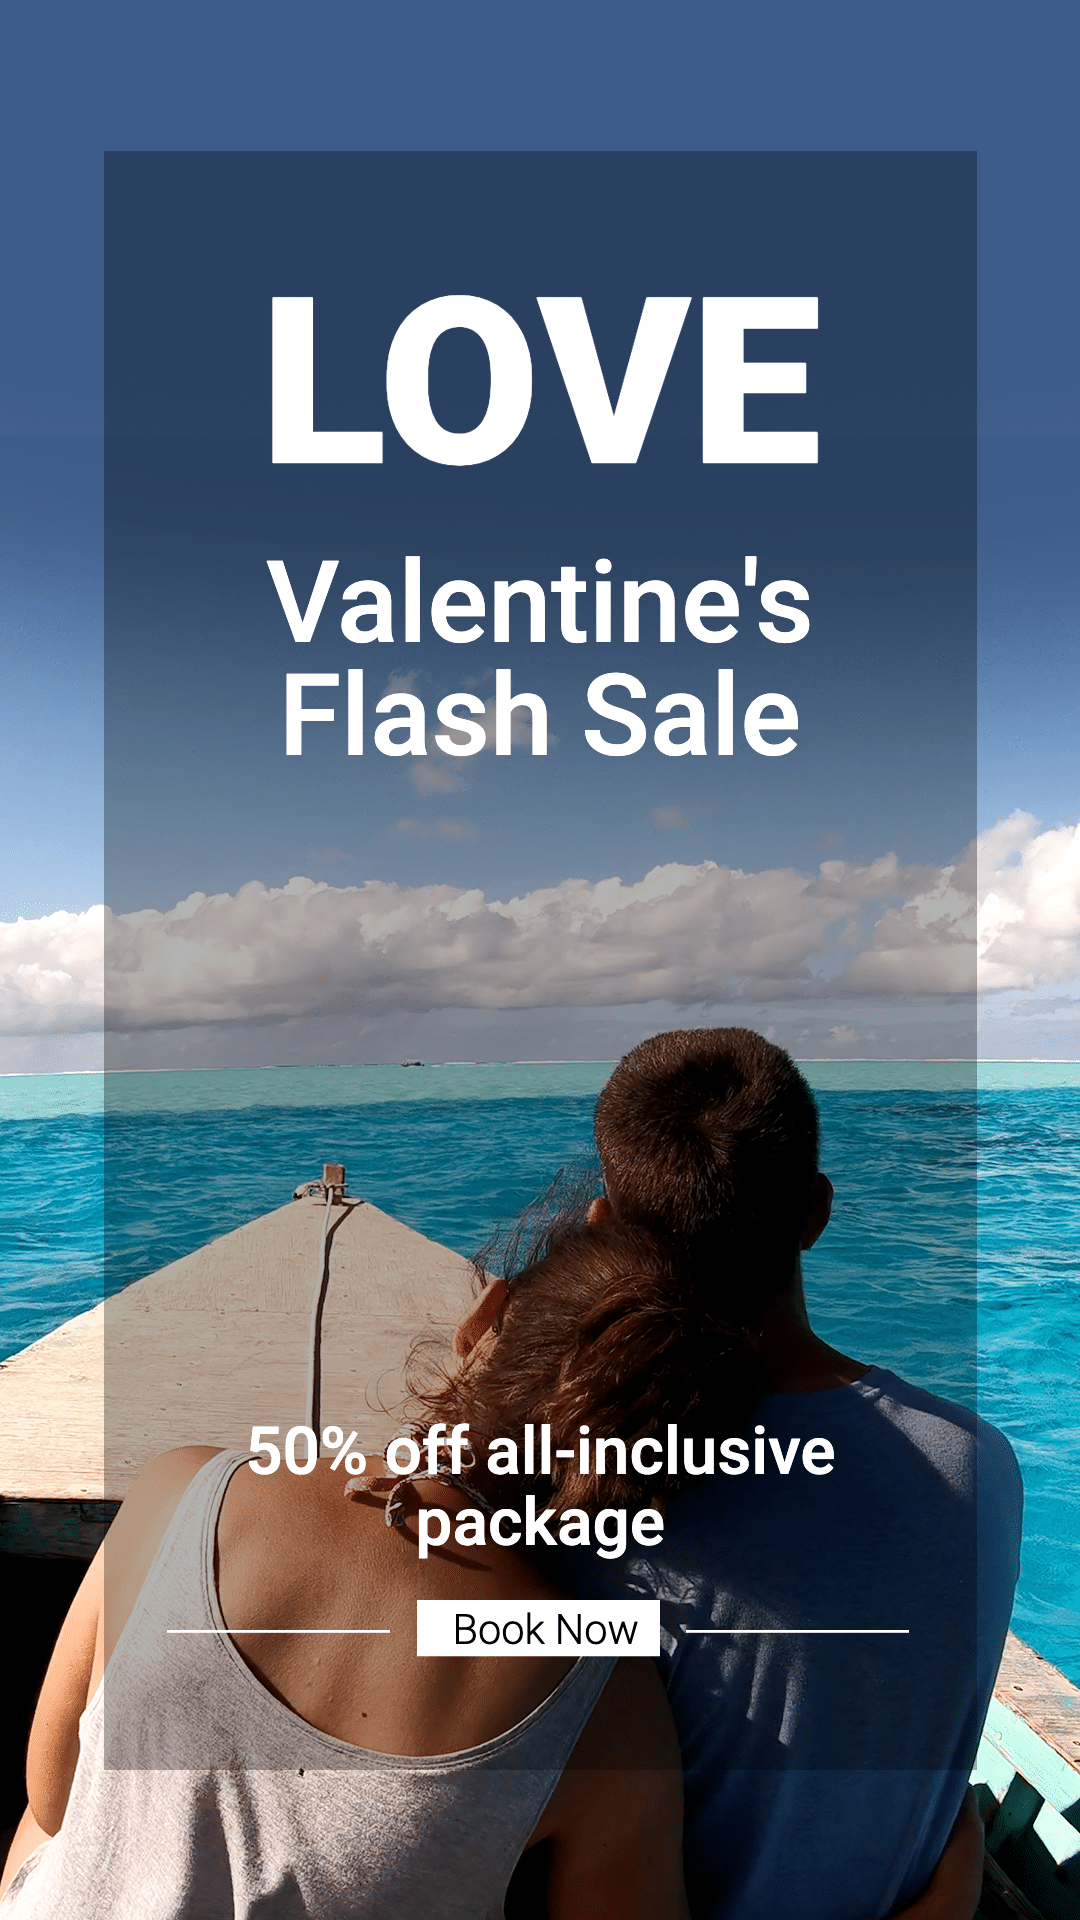 Natural Scenery Valentine’s Day Travel Promotion Ecommerce Story